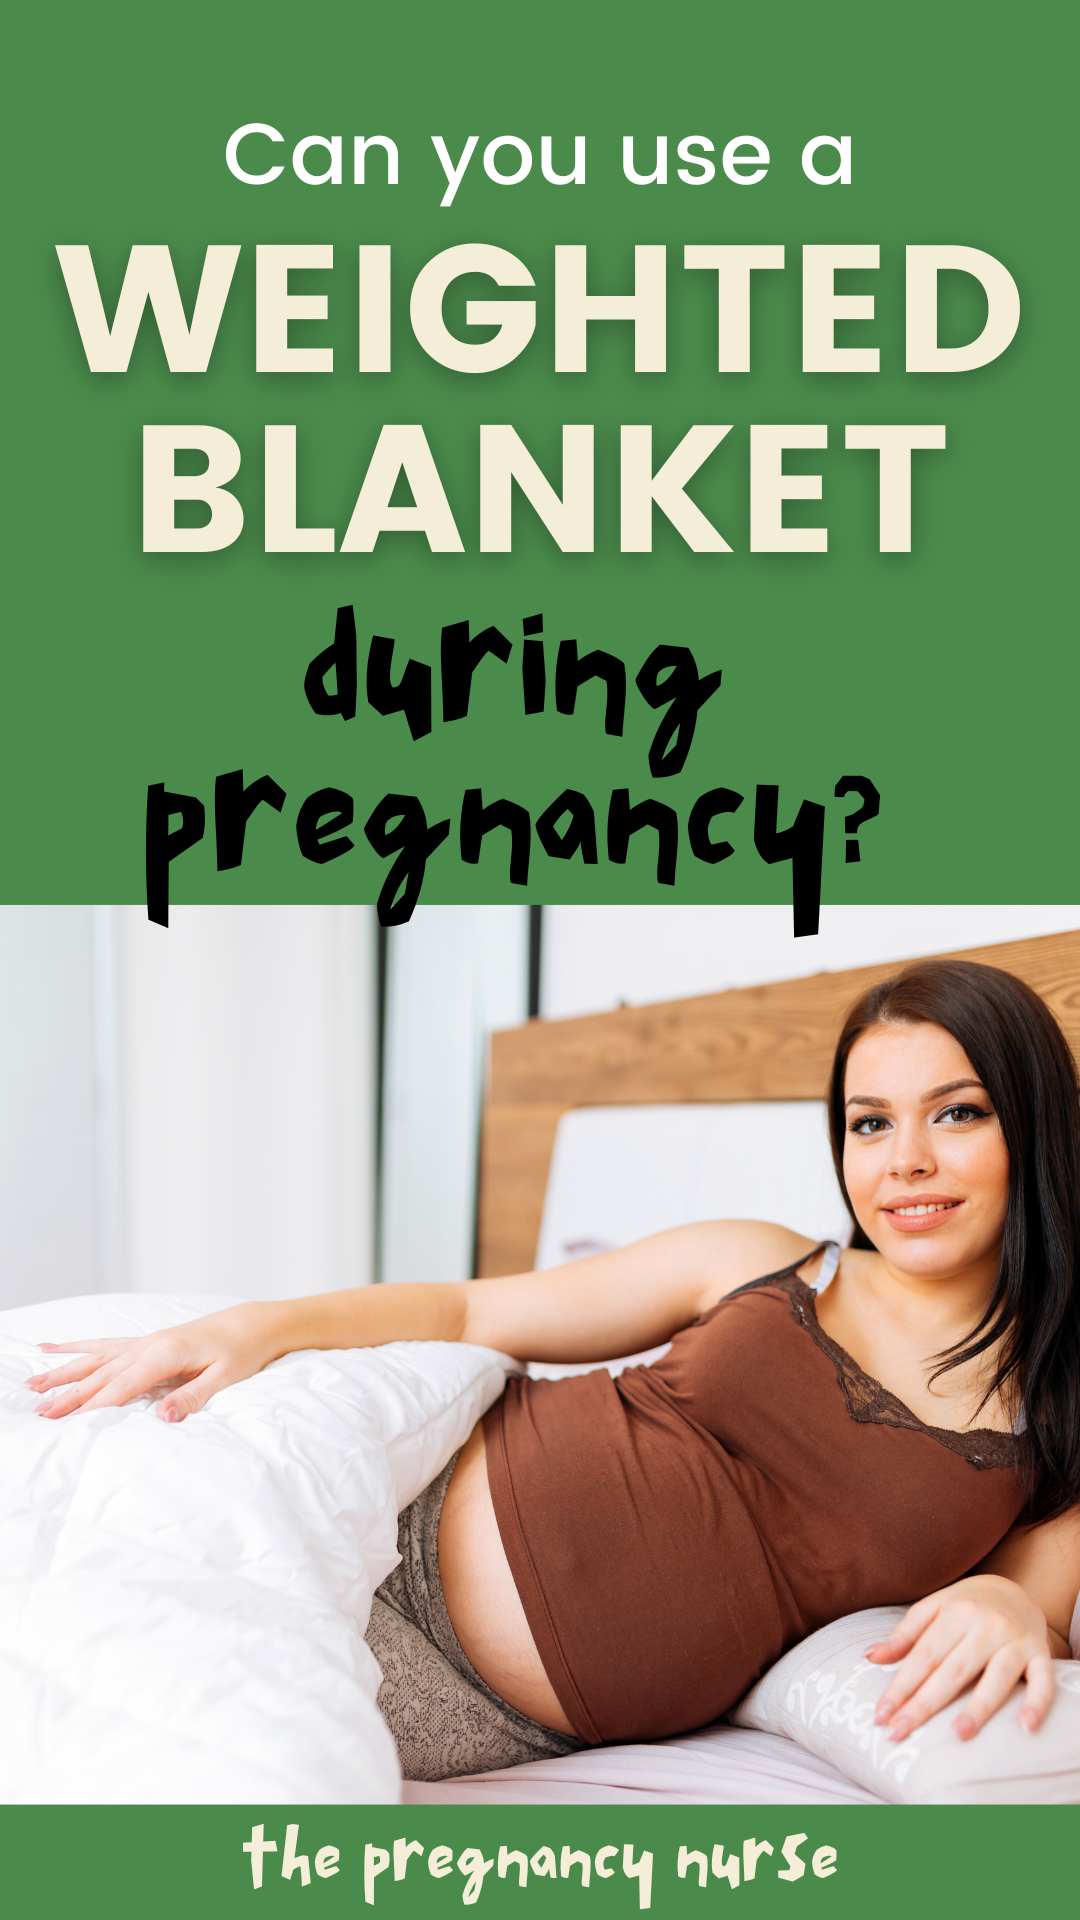 There are many products on the market that people claim will help with pregnancy-related issues. One such product is the weighted blanket. So, can you use a weighted blanket when pregnant? The answer is yes, in some cases. Keep reading to find out more about how a weighted blanket might help during your pregnancy and when to consult your doctor.